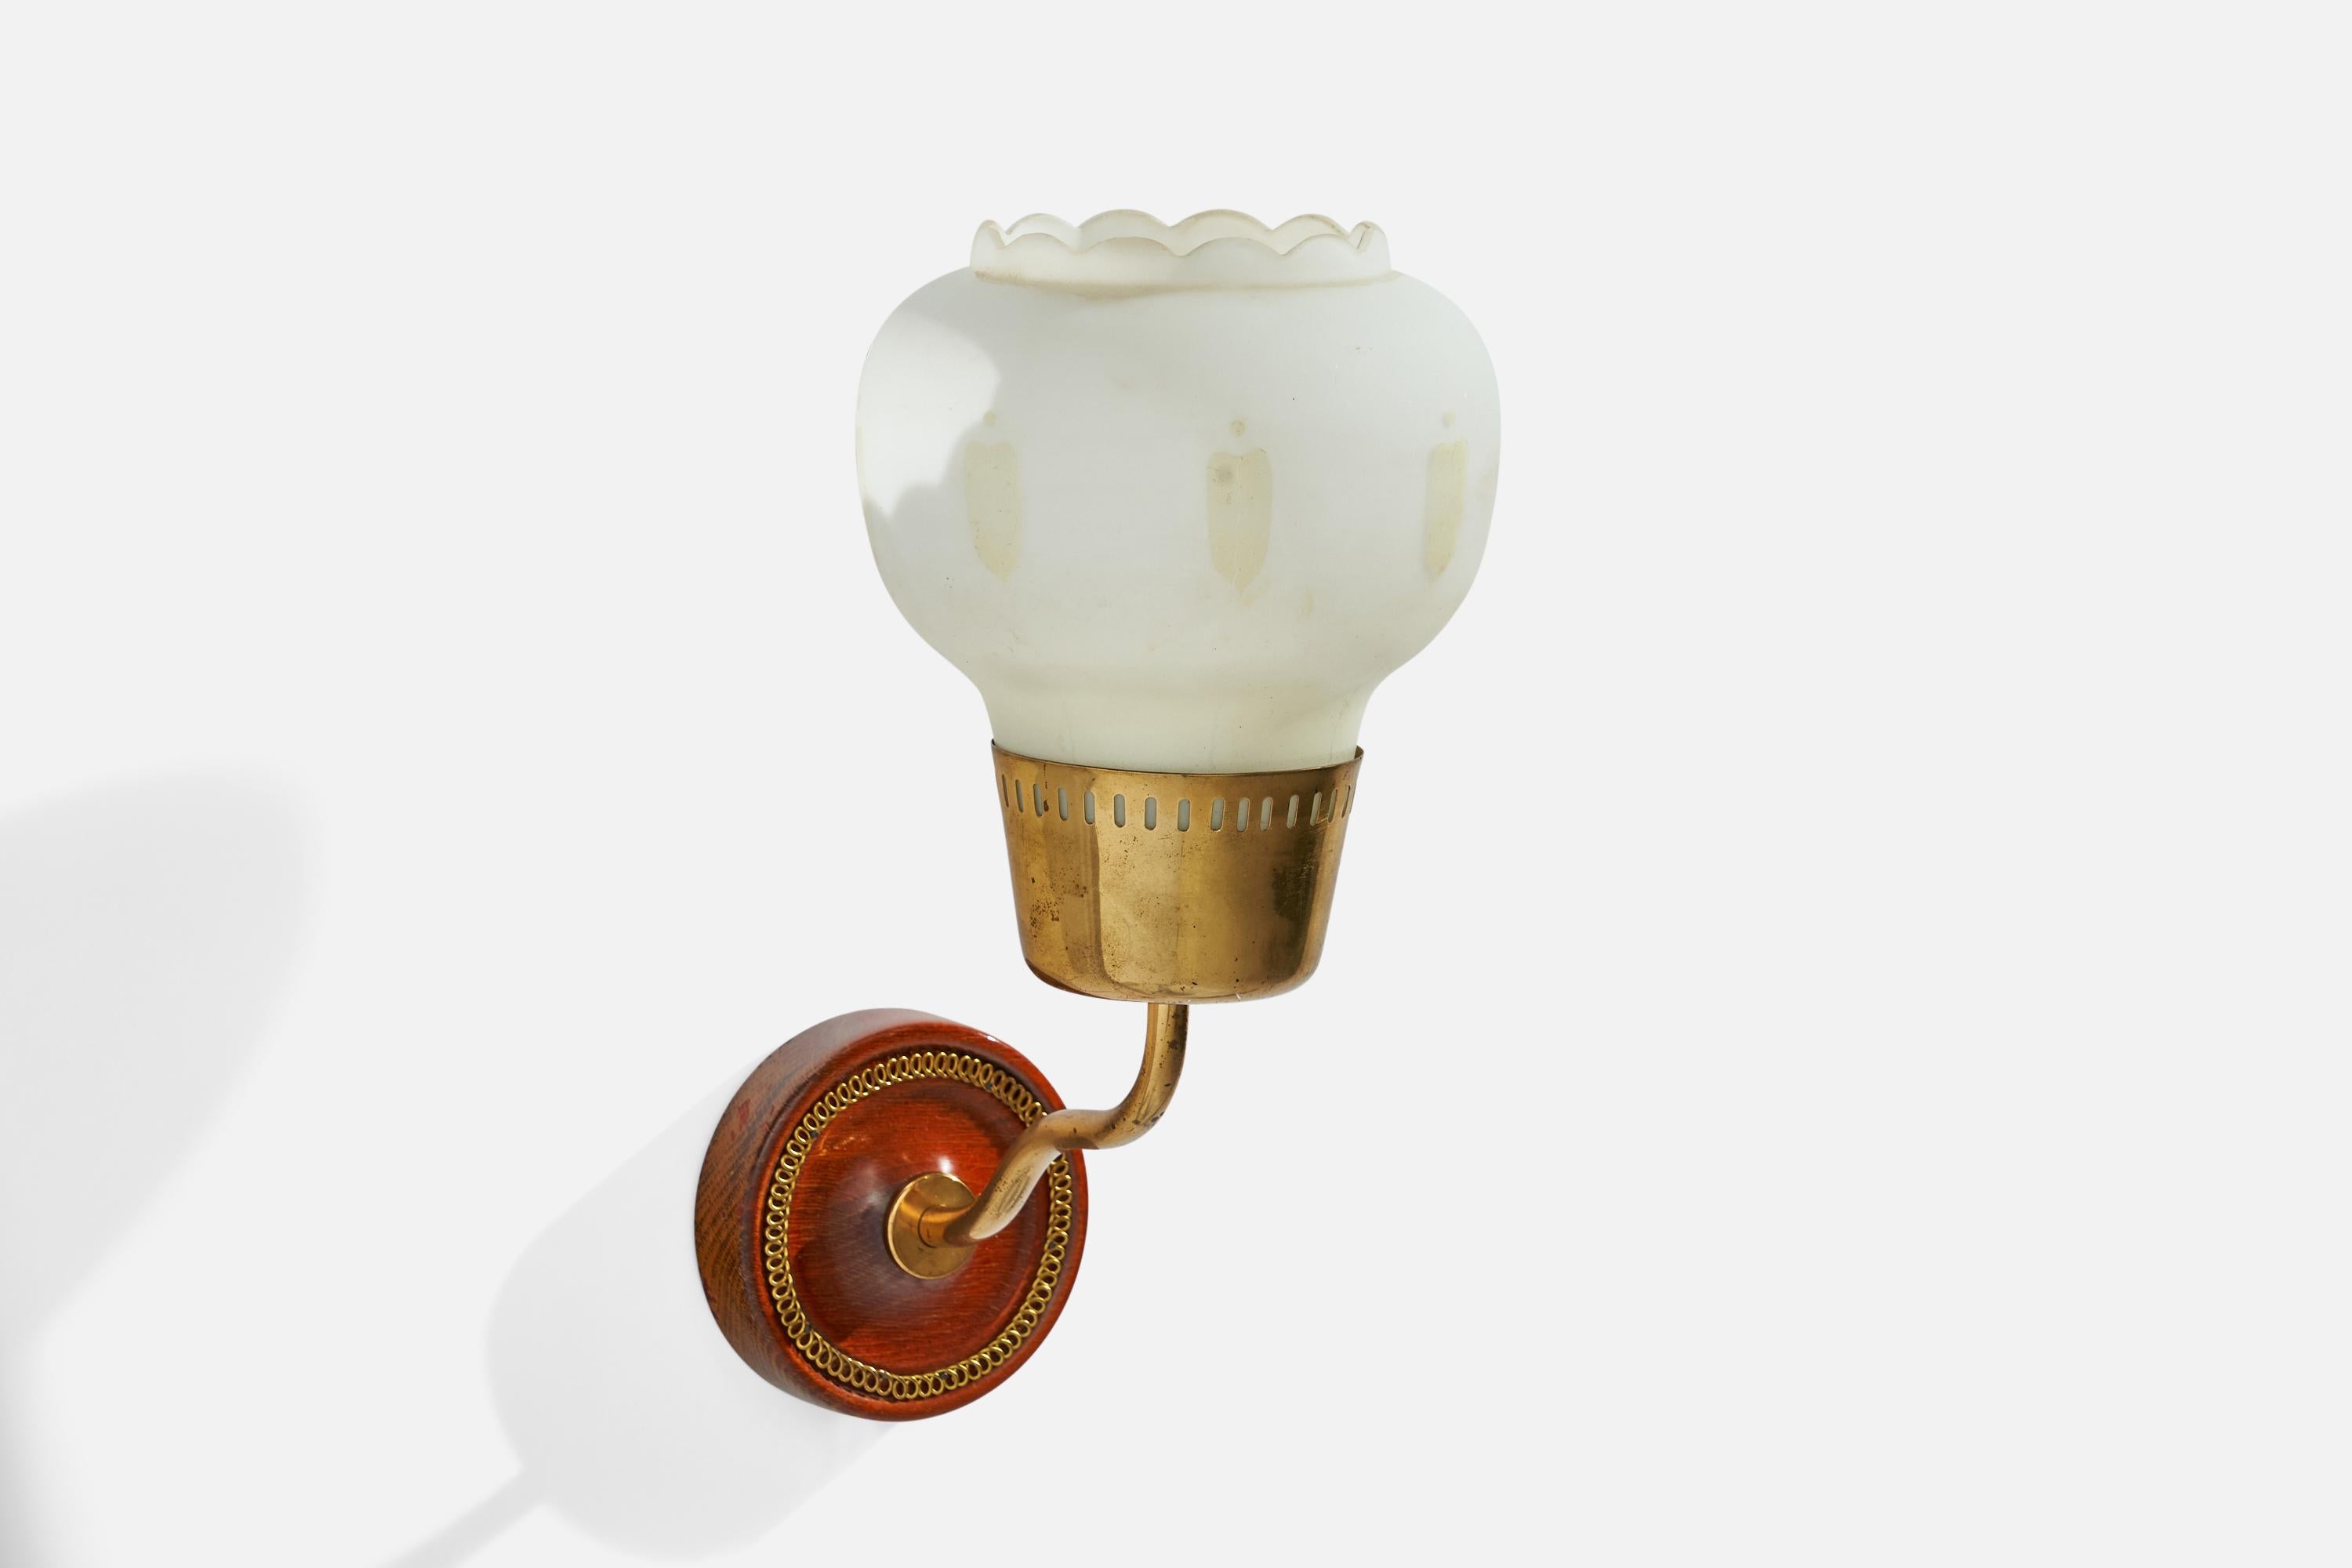 A brass, mahogany and opaline glass wall light designed and produced in Sweden, 1940s.

Overall Dimensions (inches): 10.5” H x 5.5”  W x 8.5” D
Back Plate Dimensions (inches): 3.75”  H x 3.75”  W x .75” D
Bulb Specifications: E-26 Bulb
Number of